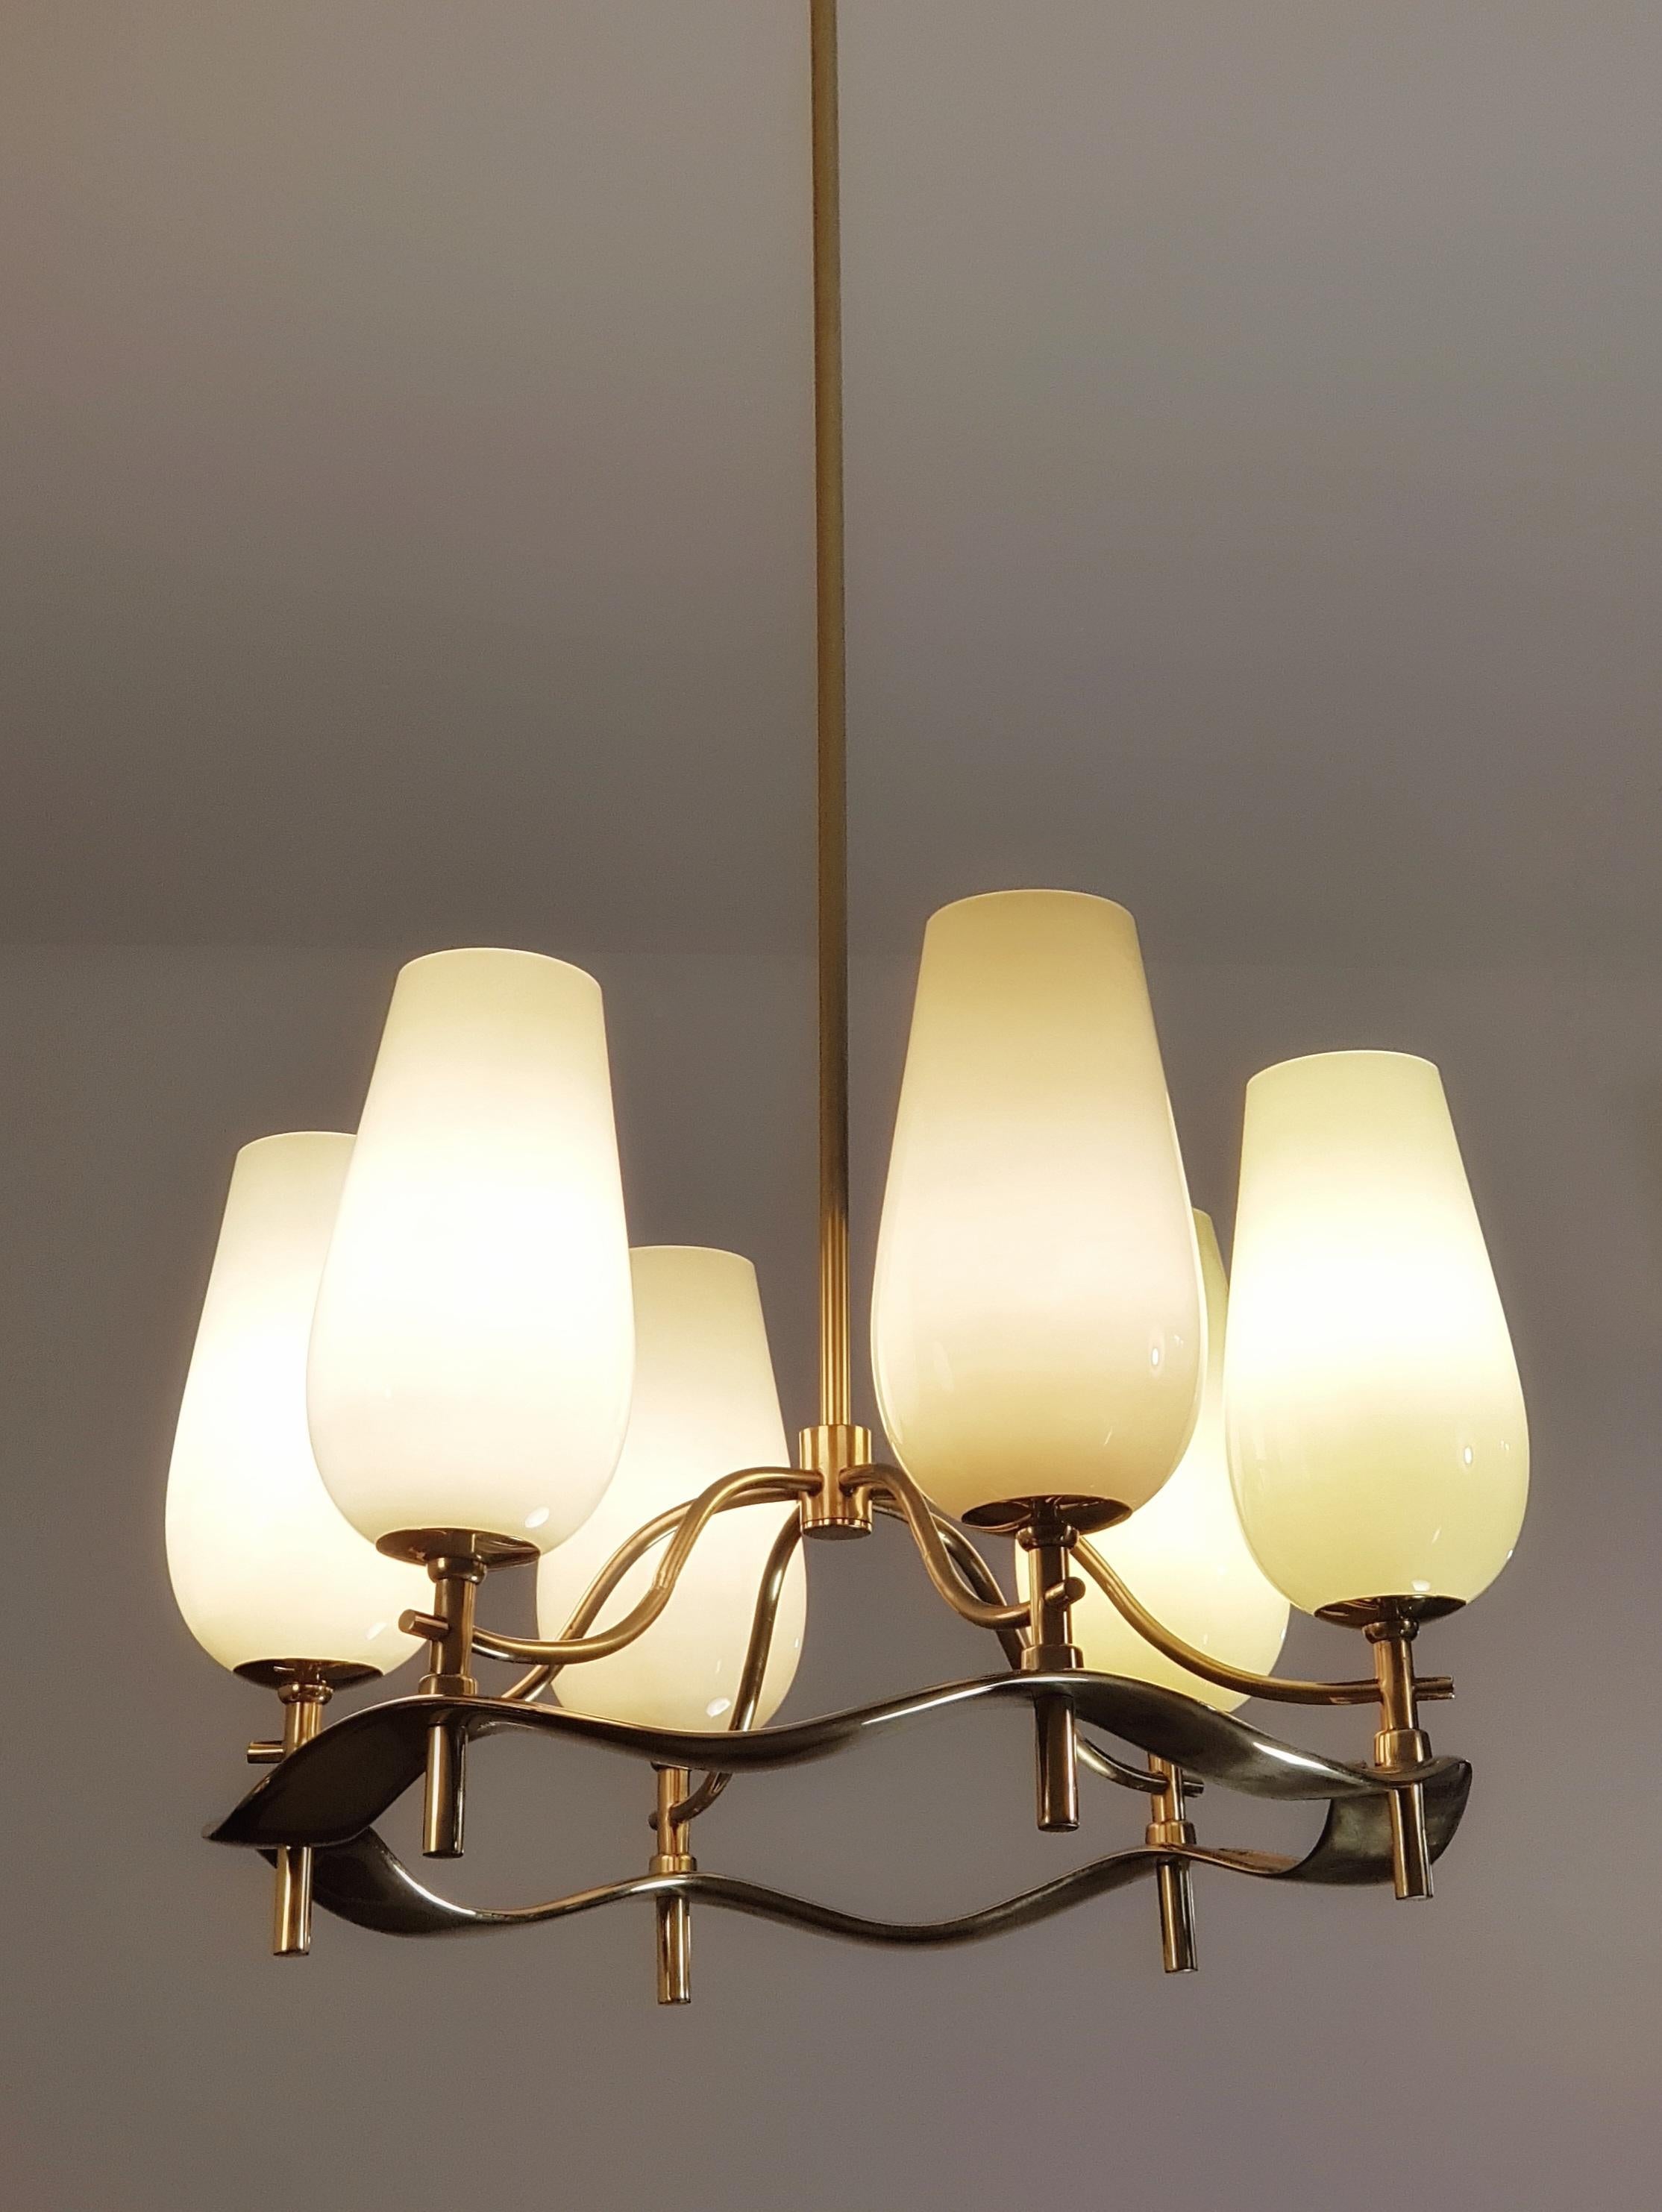 A beautiful sculptural chandelier commissioned for a private household in Tampere in the late 1940s. Some versions of this lamp have been seen before, but rarely with full brass as usually the lower cast brass ring is supported by the electric